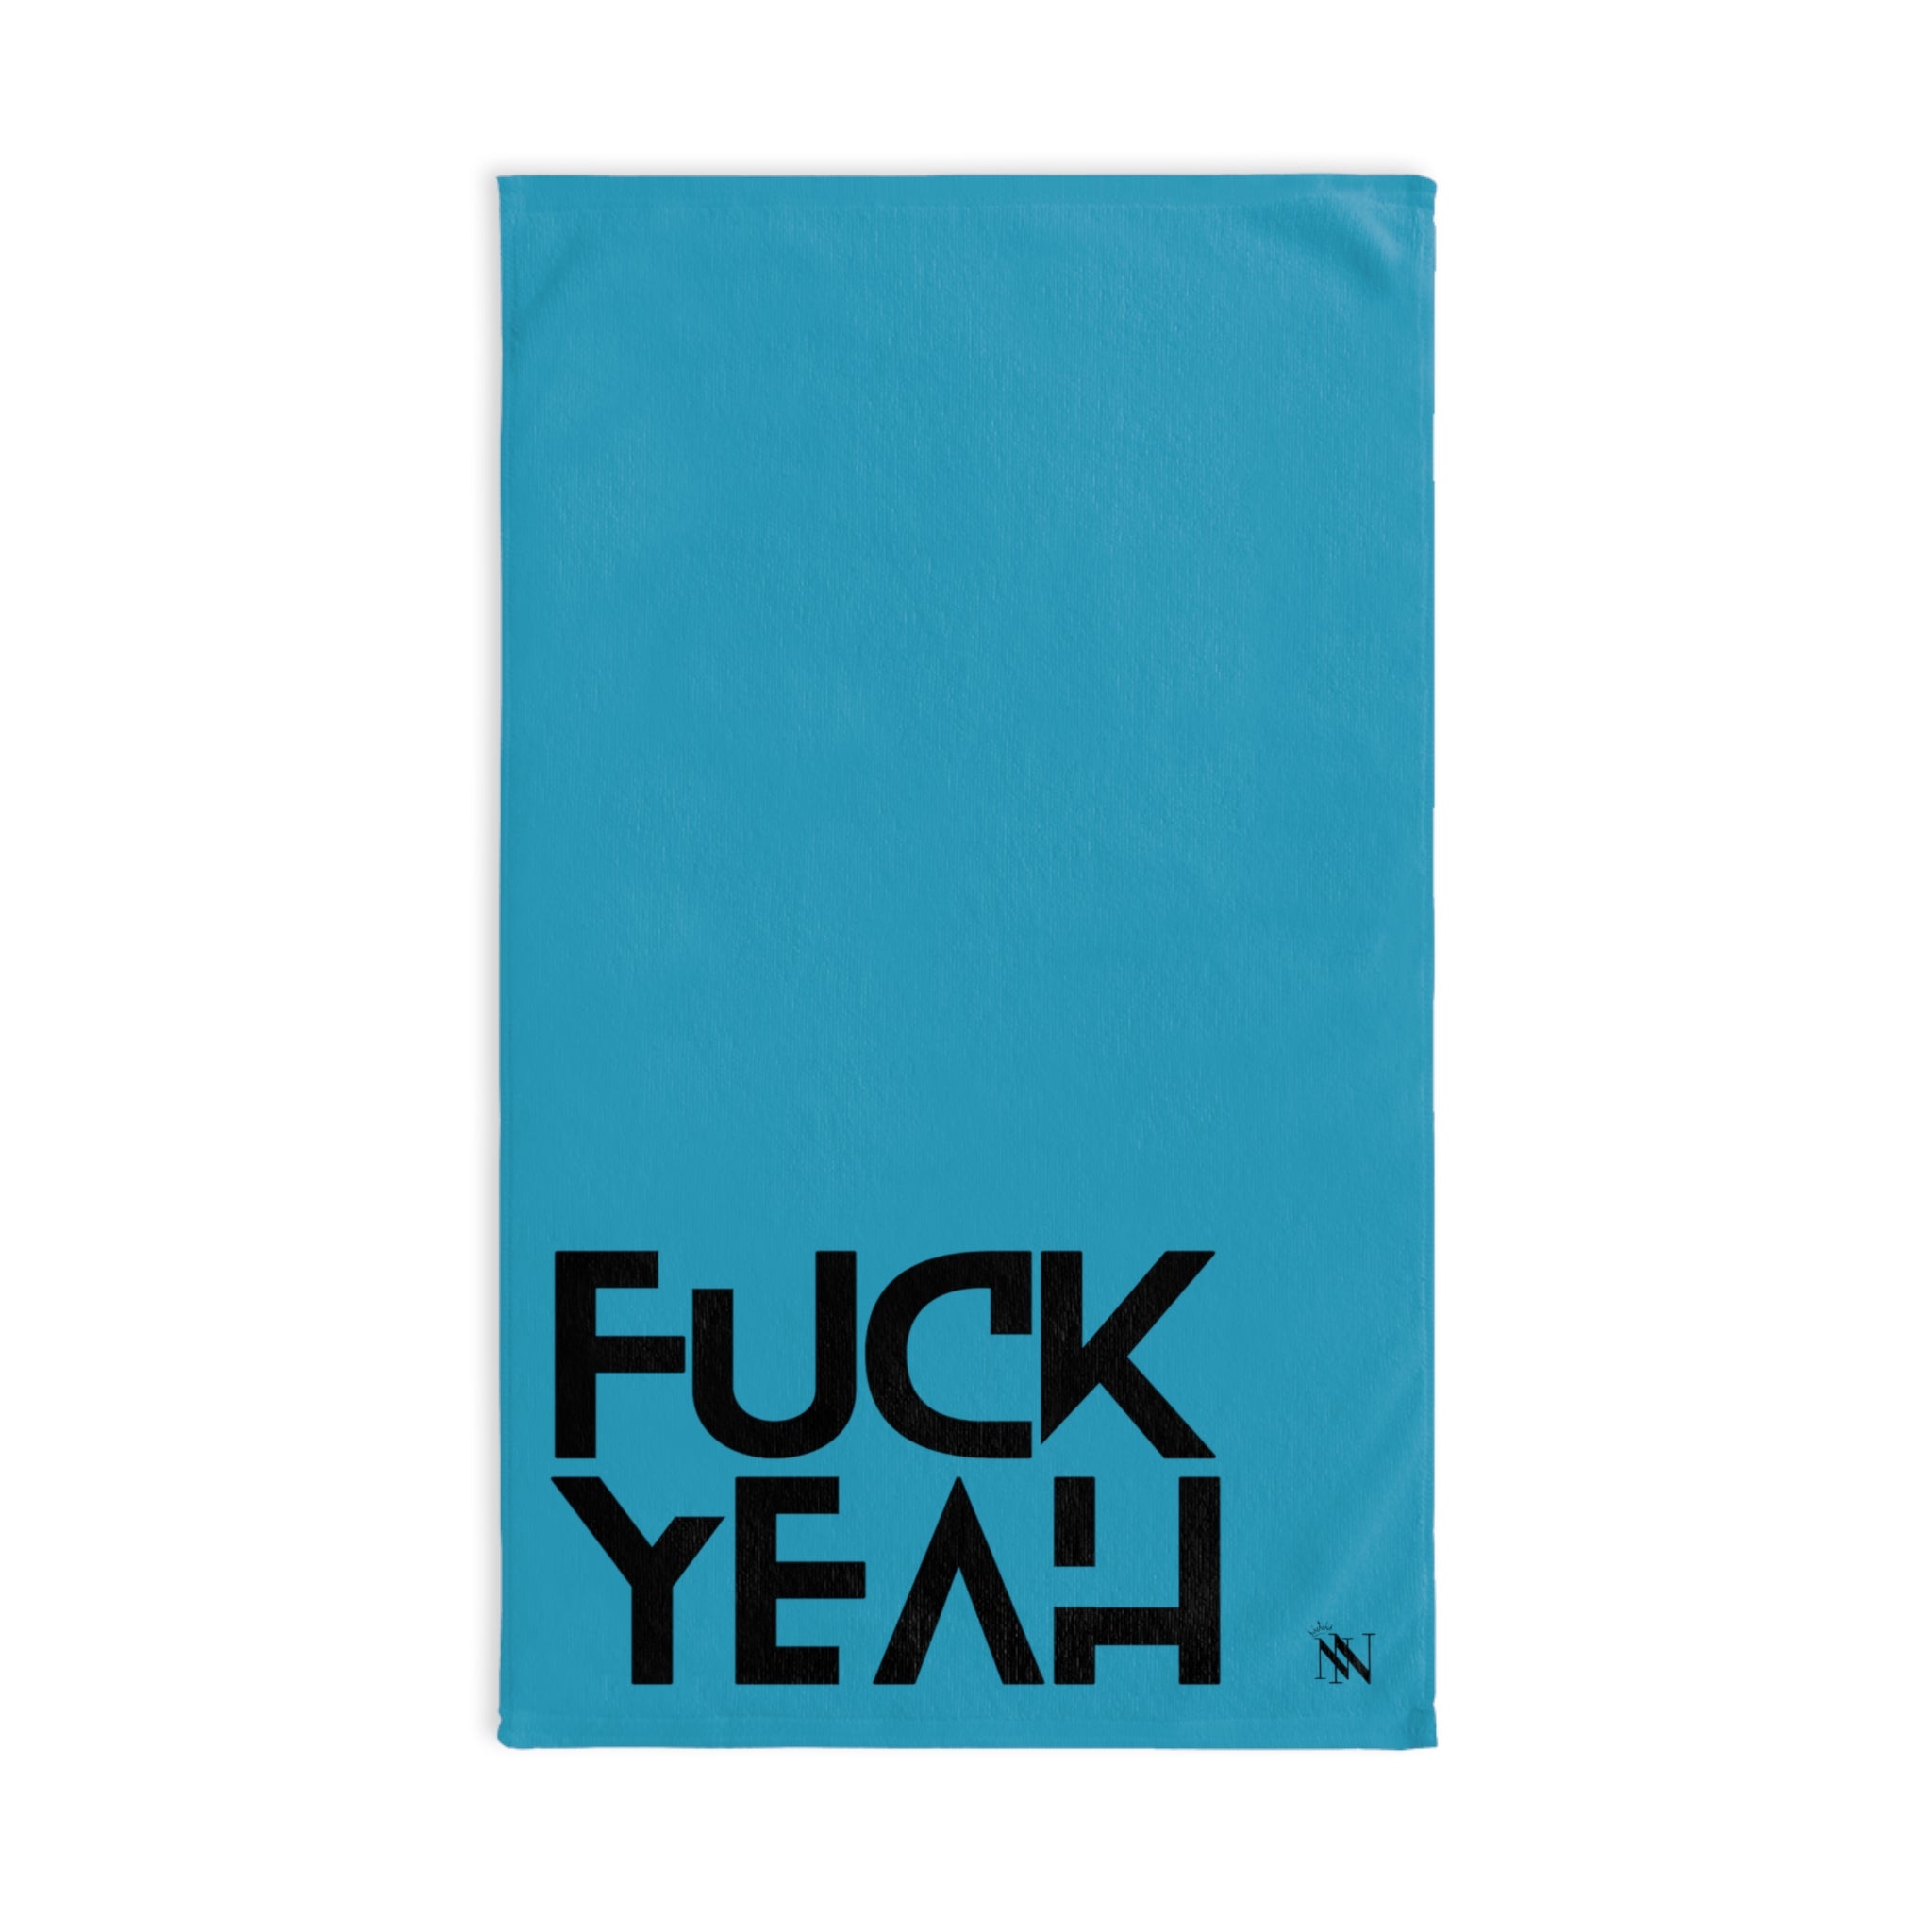 Yeah F*ck Yes Teal | Novelty Gifts for Boyfriend, Funny Towel Romantic Gift for Wedding Couple Fiance First Year Anniversary Valentines, Party Gag Gifts, Joke Humor Cloth for Husband Men BF NECTAR NAPKINS